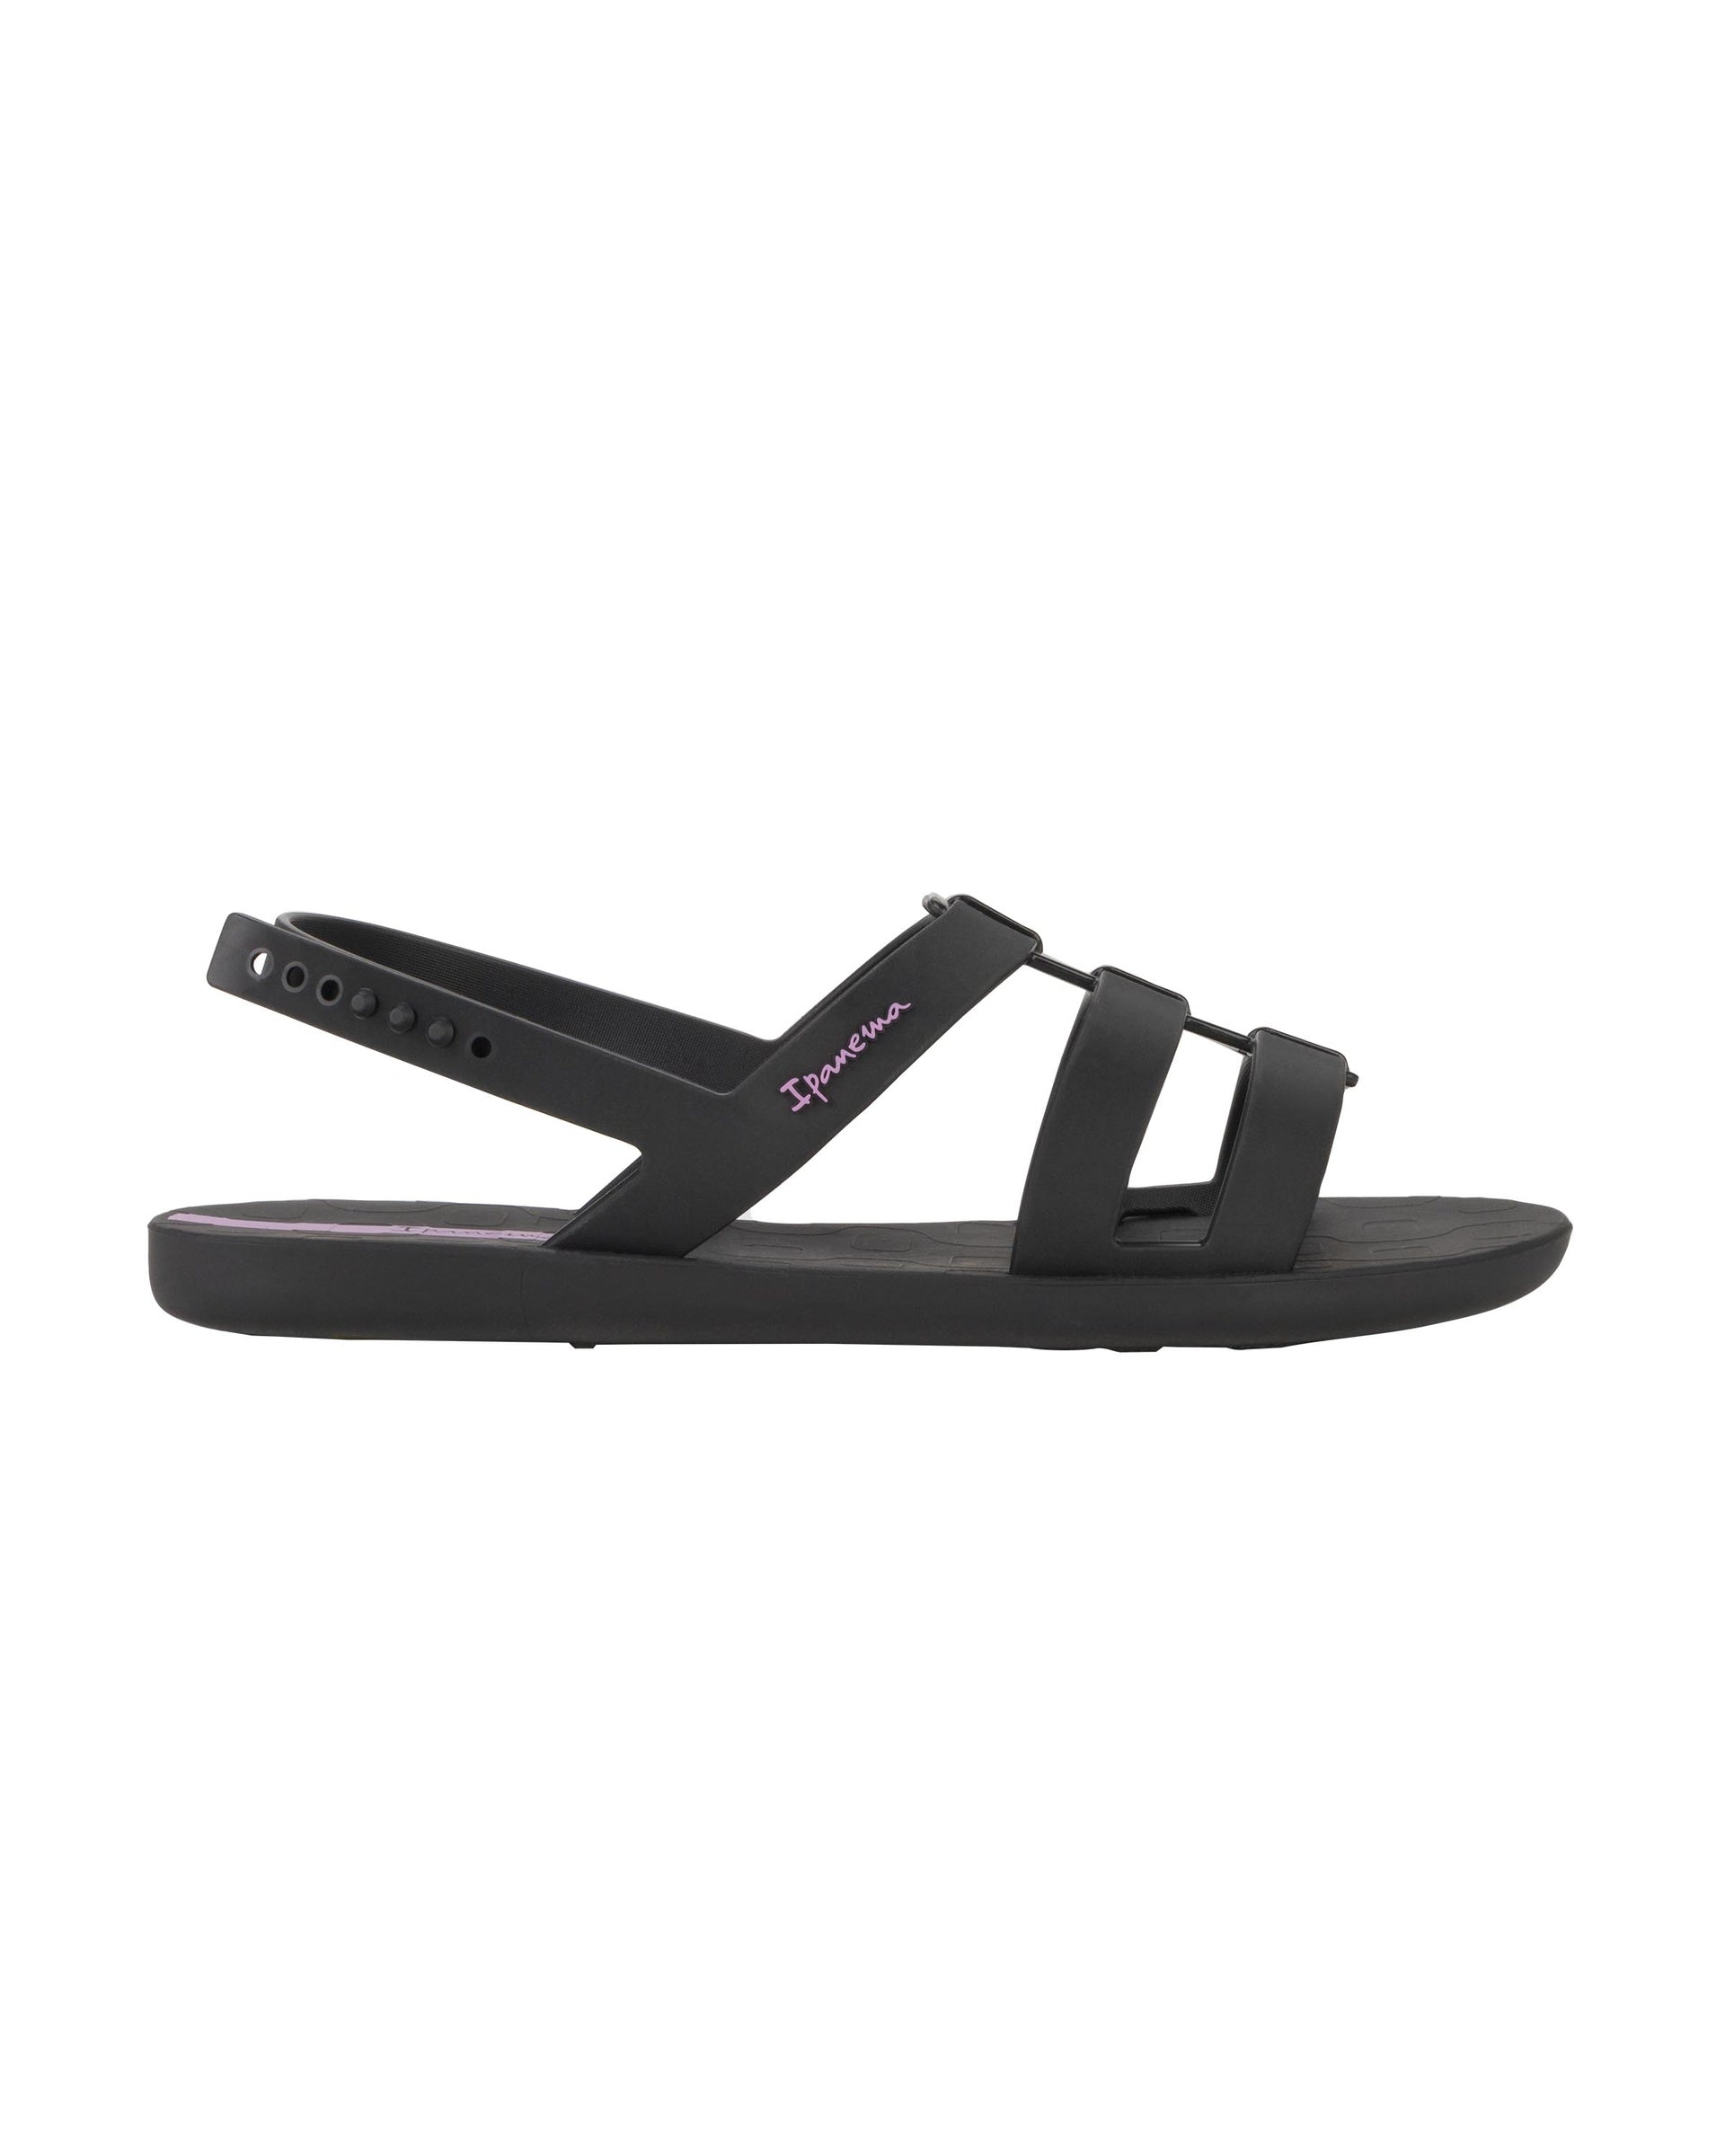 Outer side view of a black Ipanema Style women's sandal.